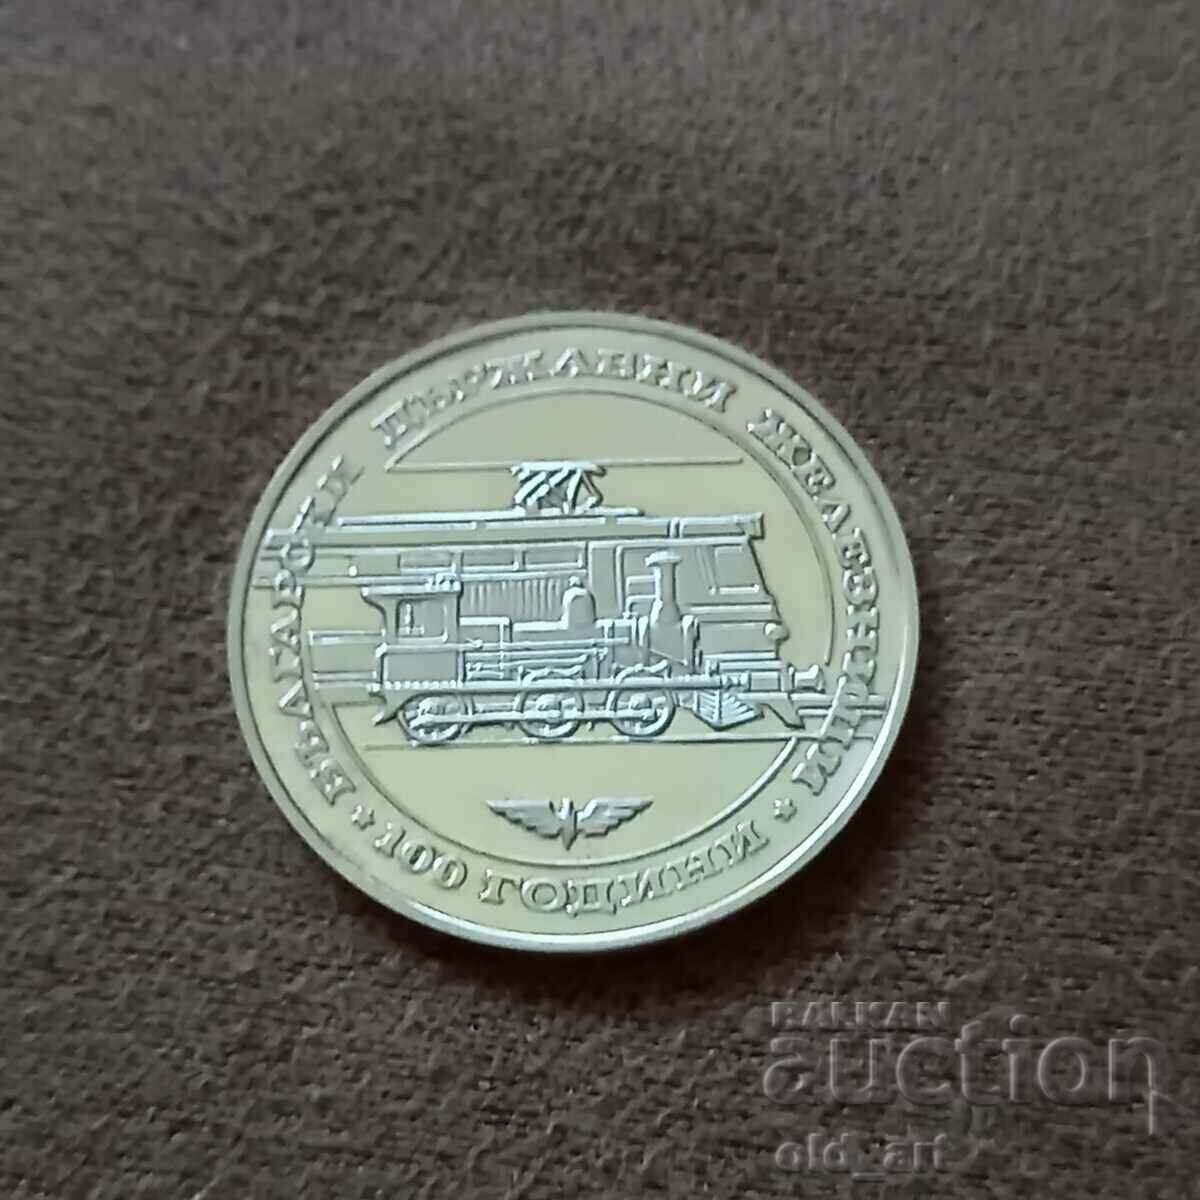 Coin - 20 leva 1988. 100 years of BJD